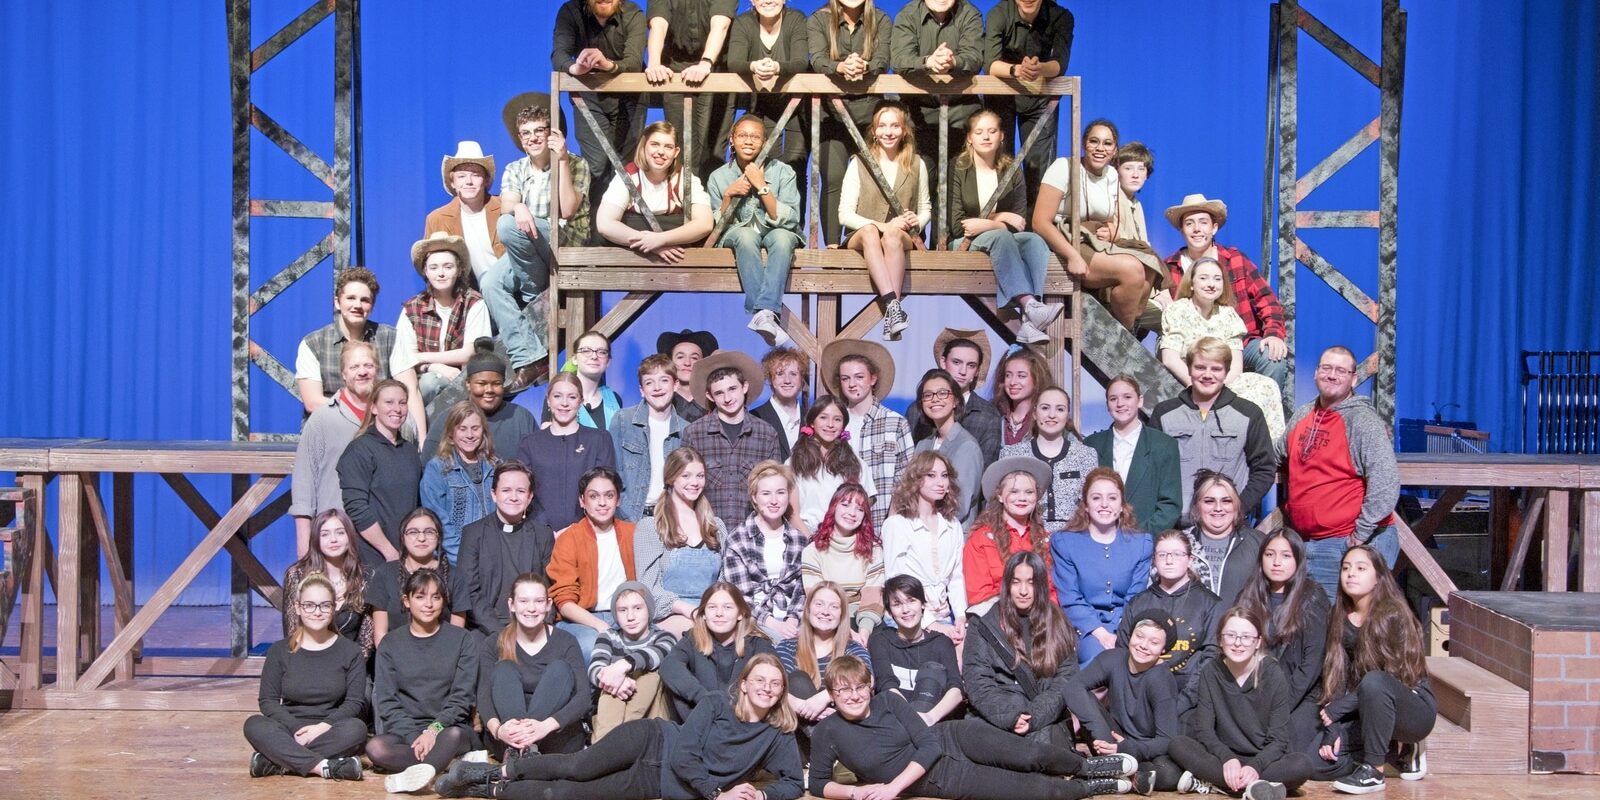 WHS-2021-Footloose-9009-Cast-Crew-R6